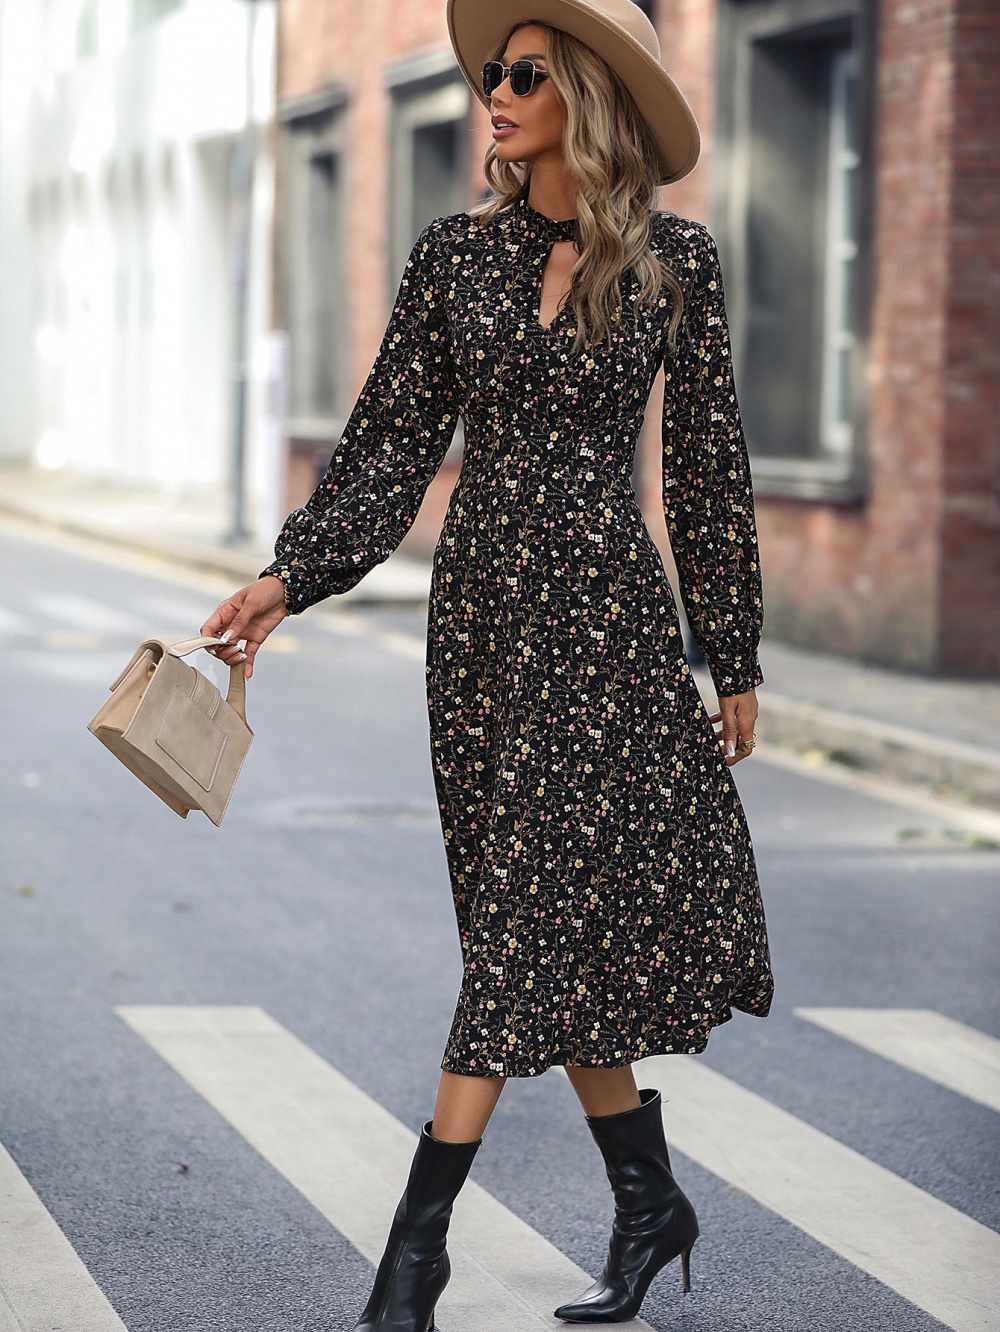 European style autumn and winter dress for women